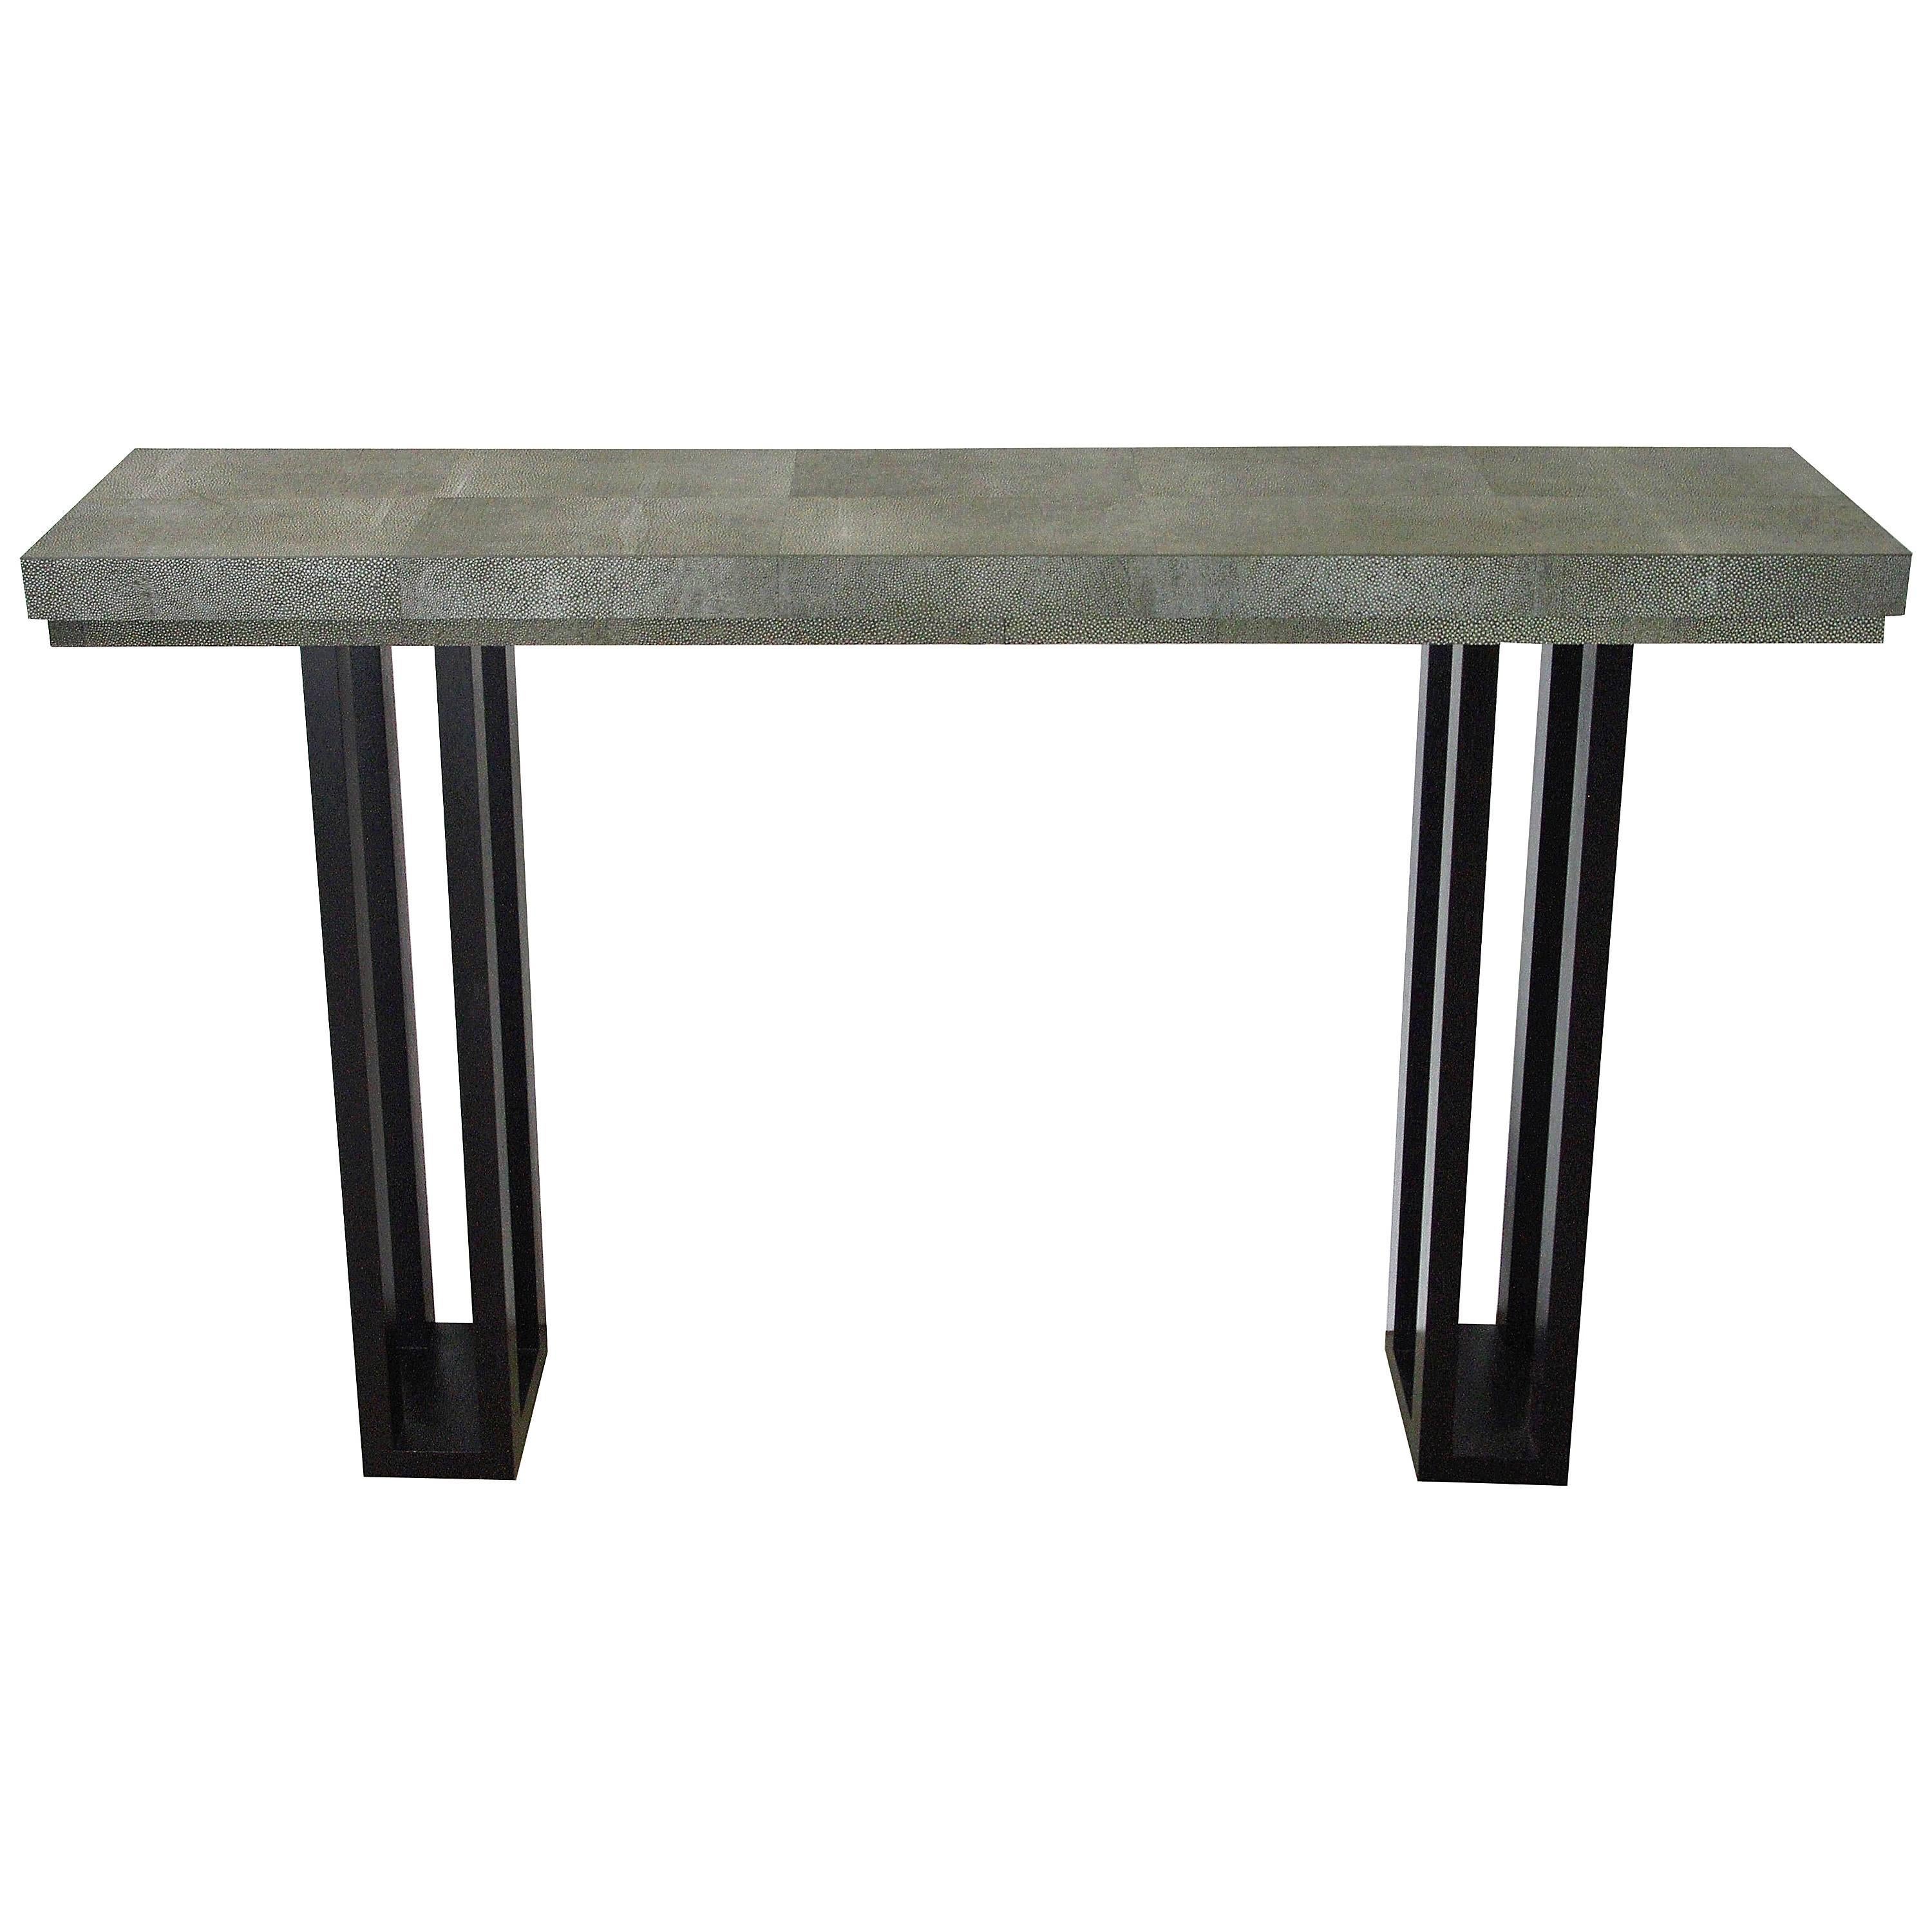 Faux Shagreen Leather Console Table by Fabio Bergomi